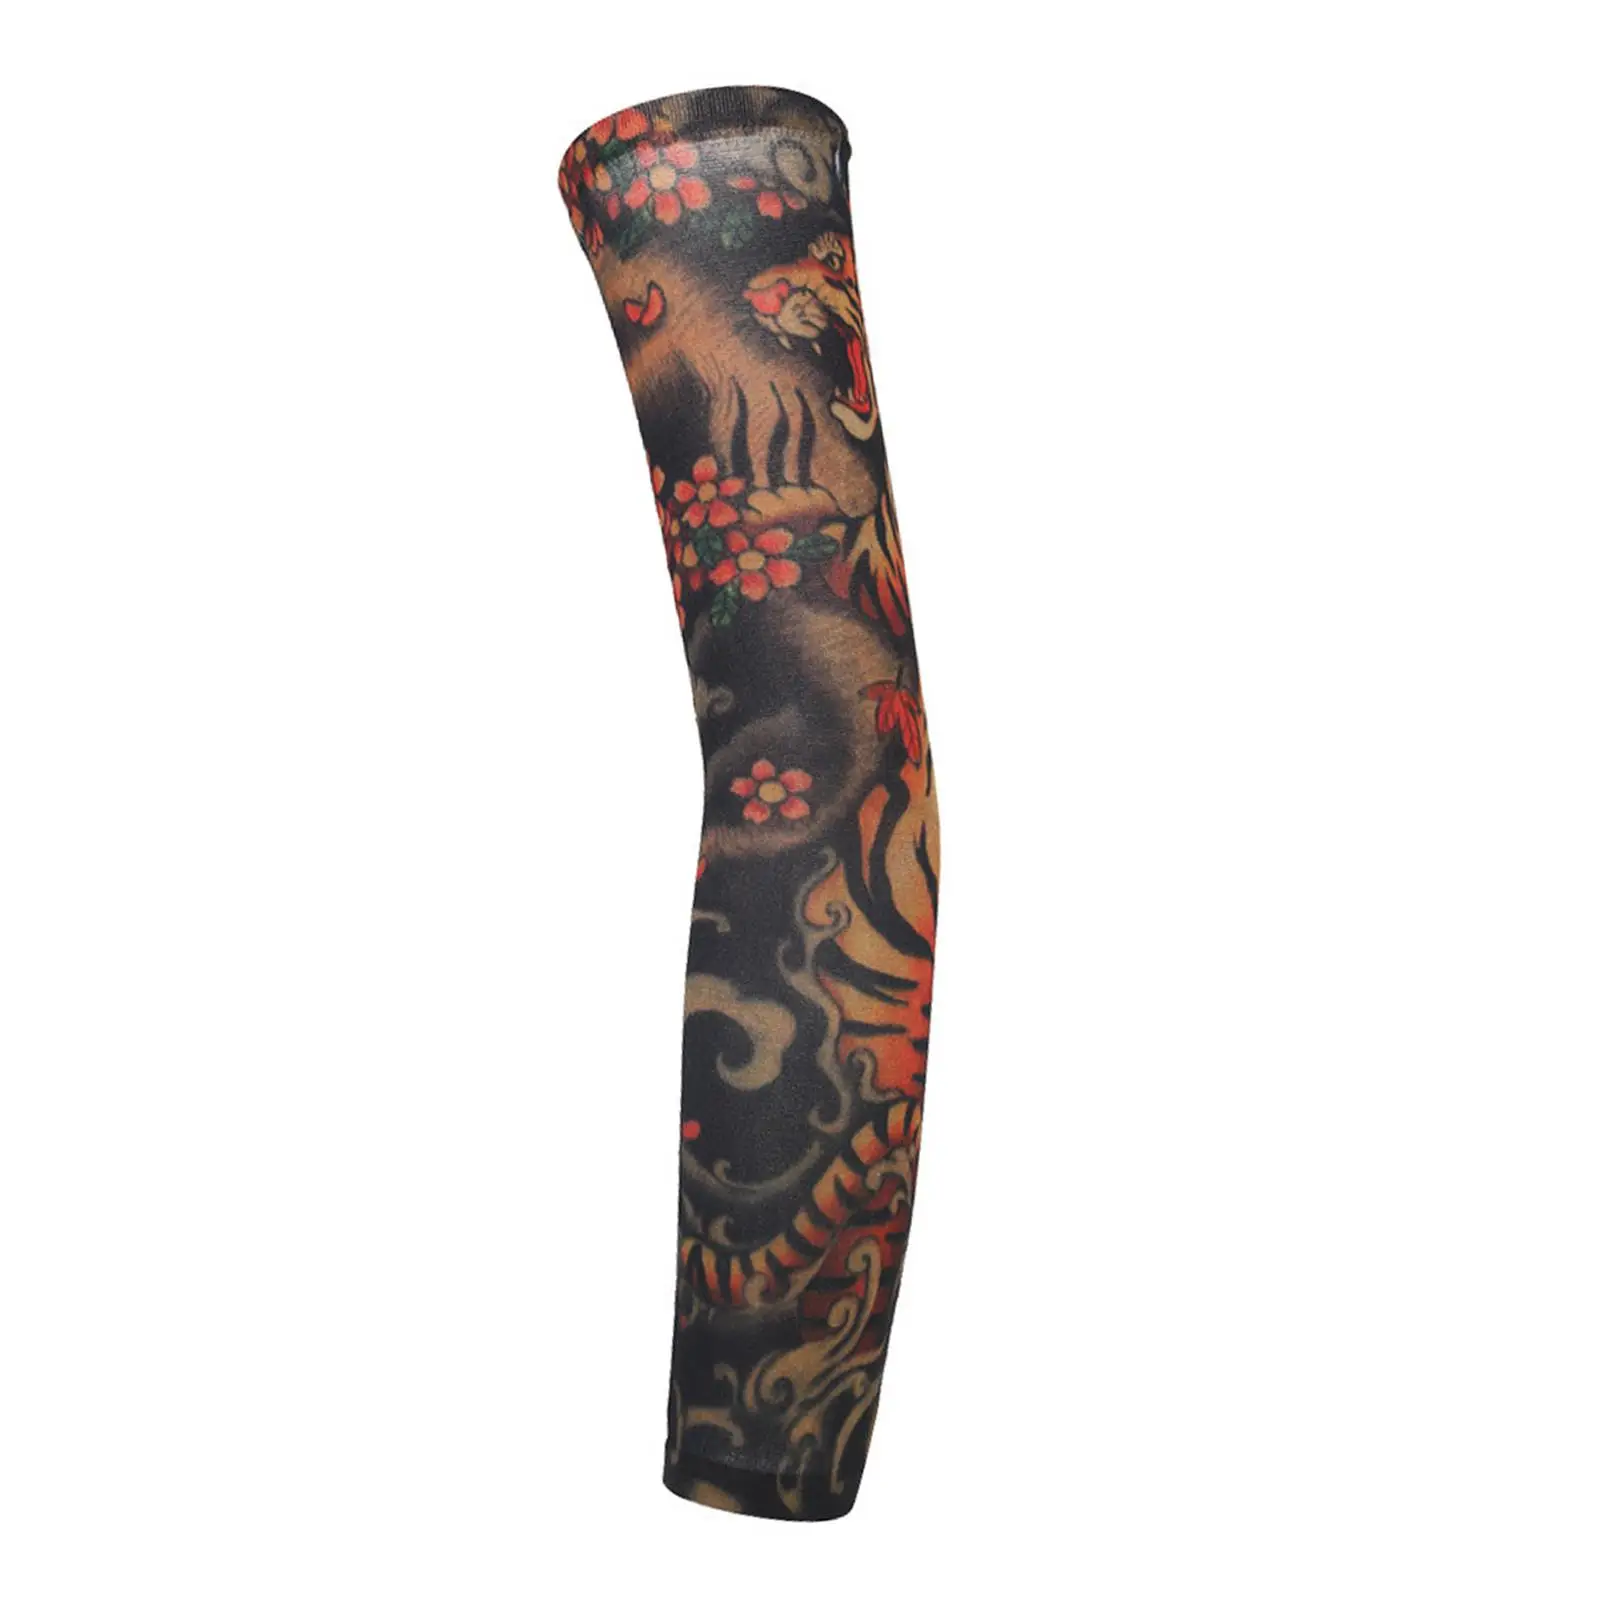 Unisex Cooling Arm Sleeves Tattoo Cover up UV Protection for Driving Playing